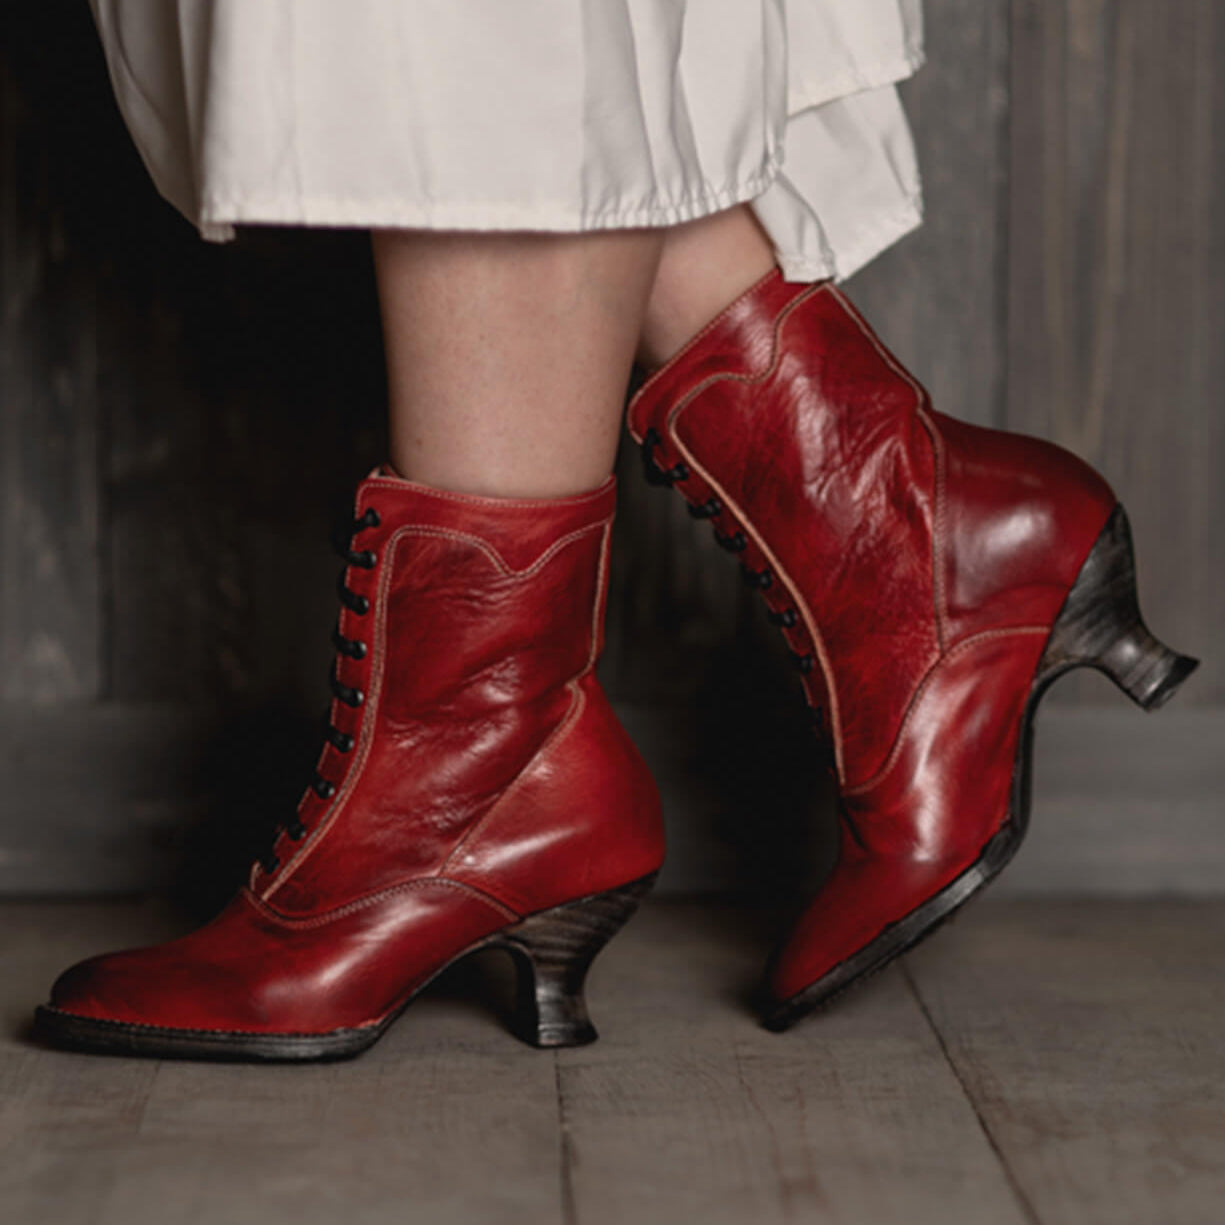 A woman with uncompromising quality, wearing Oak Tree Farms' Eleanor Victorian style hand dyed red leather boots, gracefully walks on a wooden floor.